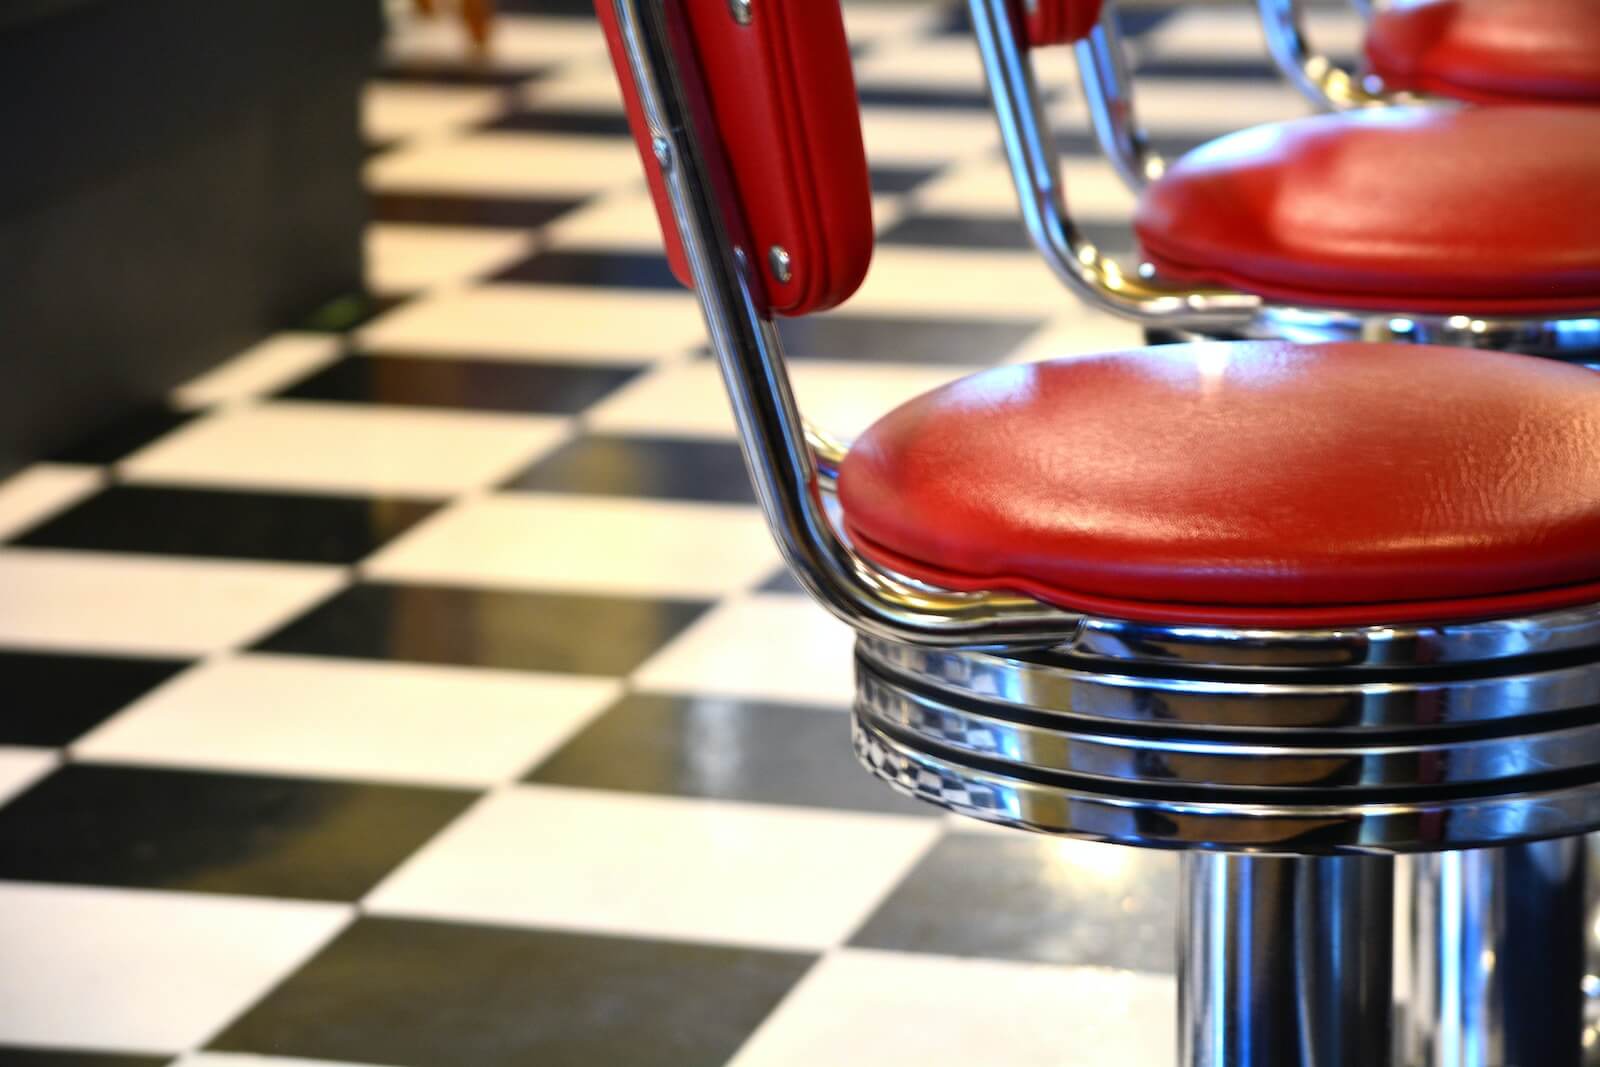 Vinyl diner stools and checkered tile floor